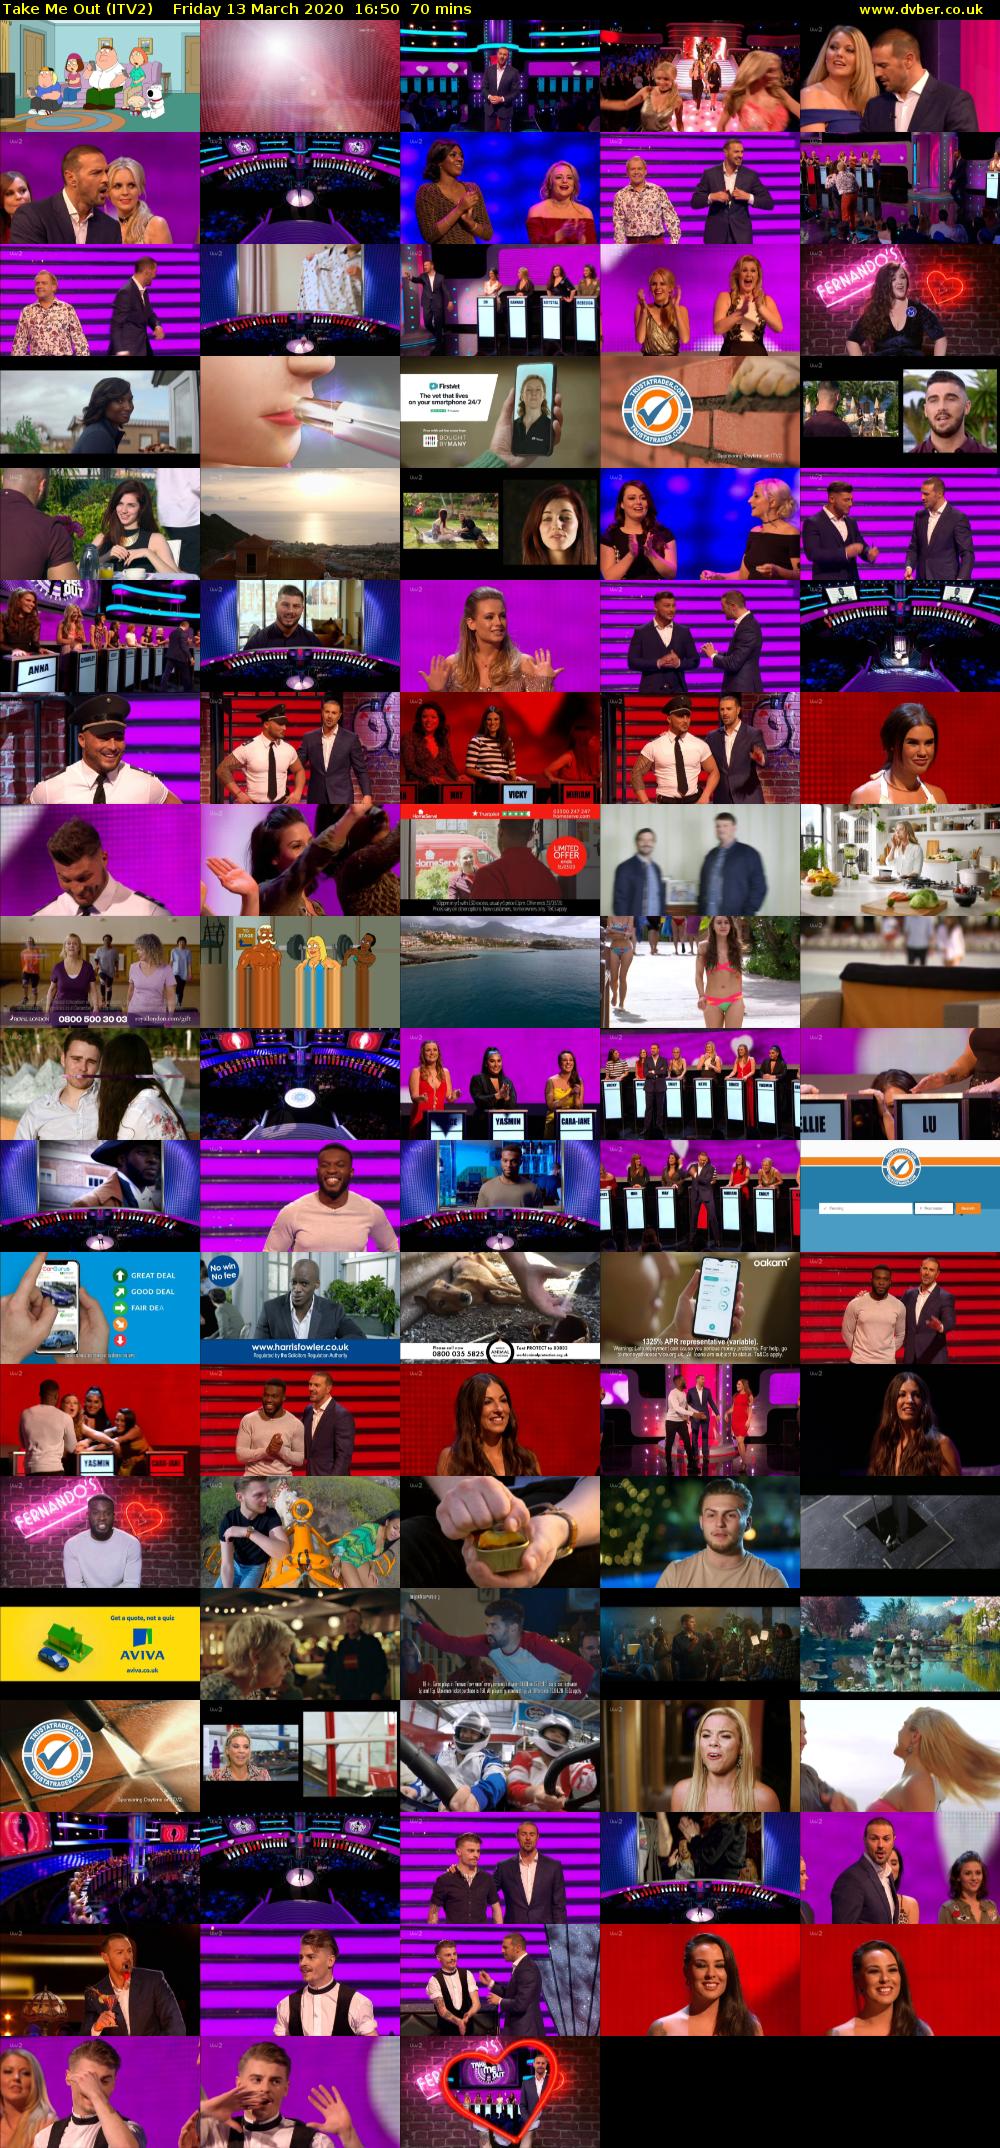 Take Me Out (ITV2) Friday 13 March 2020 16:50 - 18:00